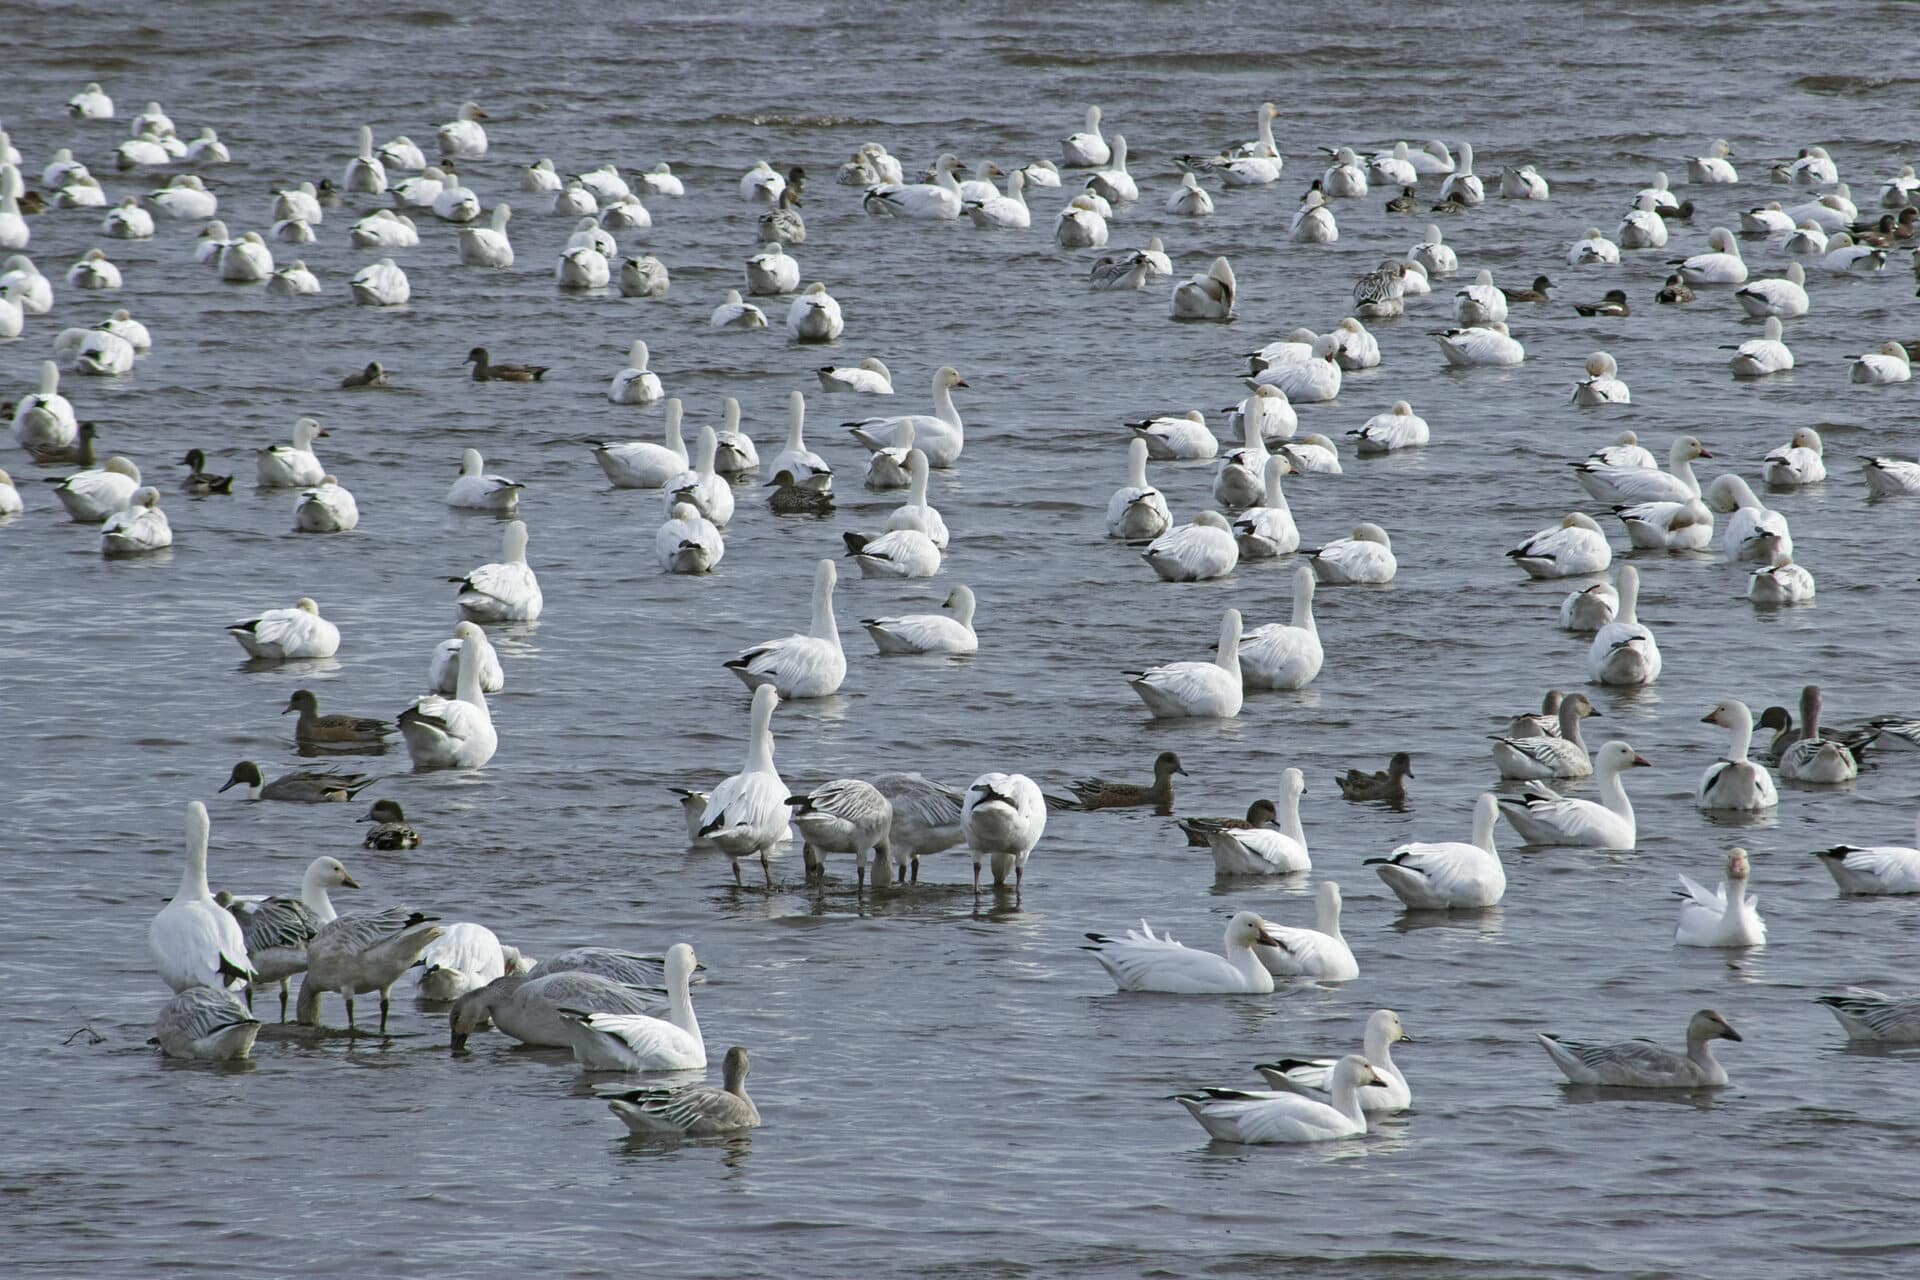 Lesser Snow Geese with Northern Pintails and American Wigeons, November 5, 2021